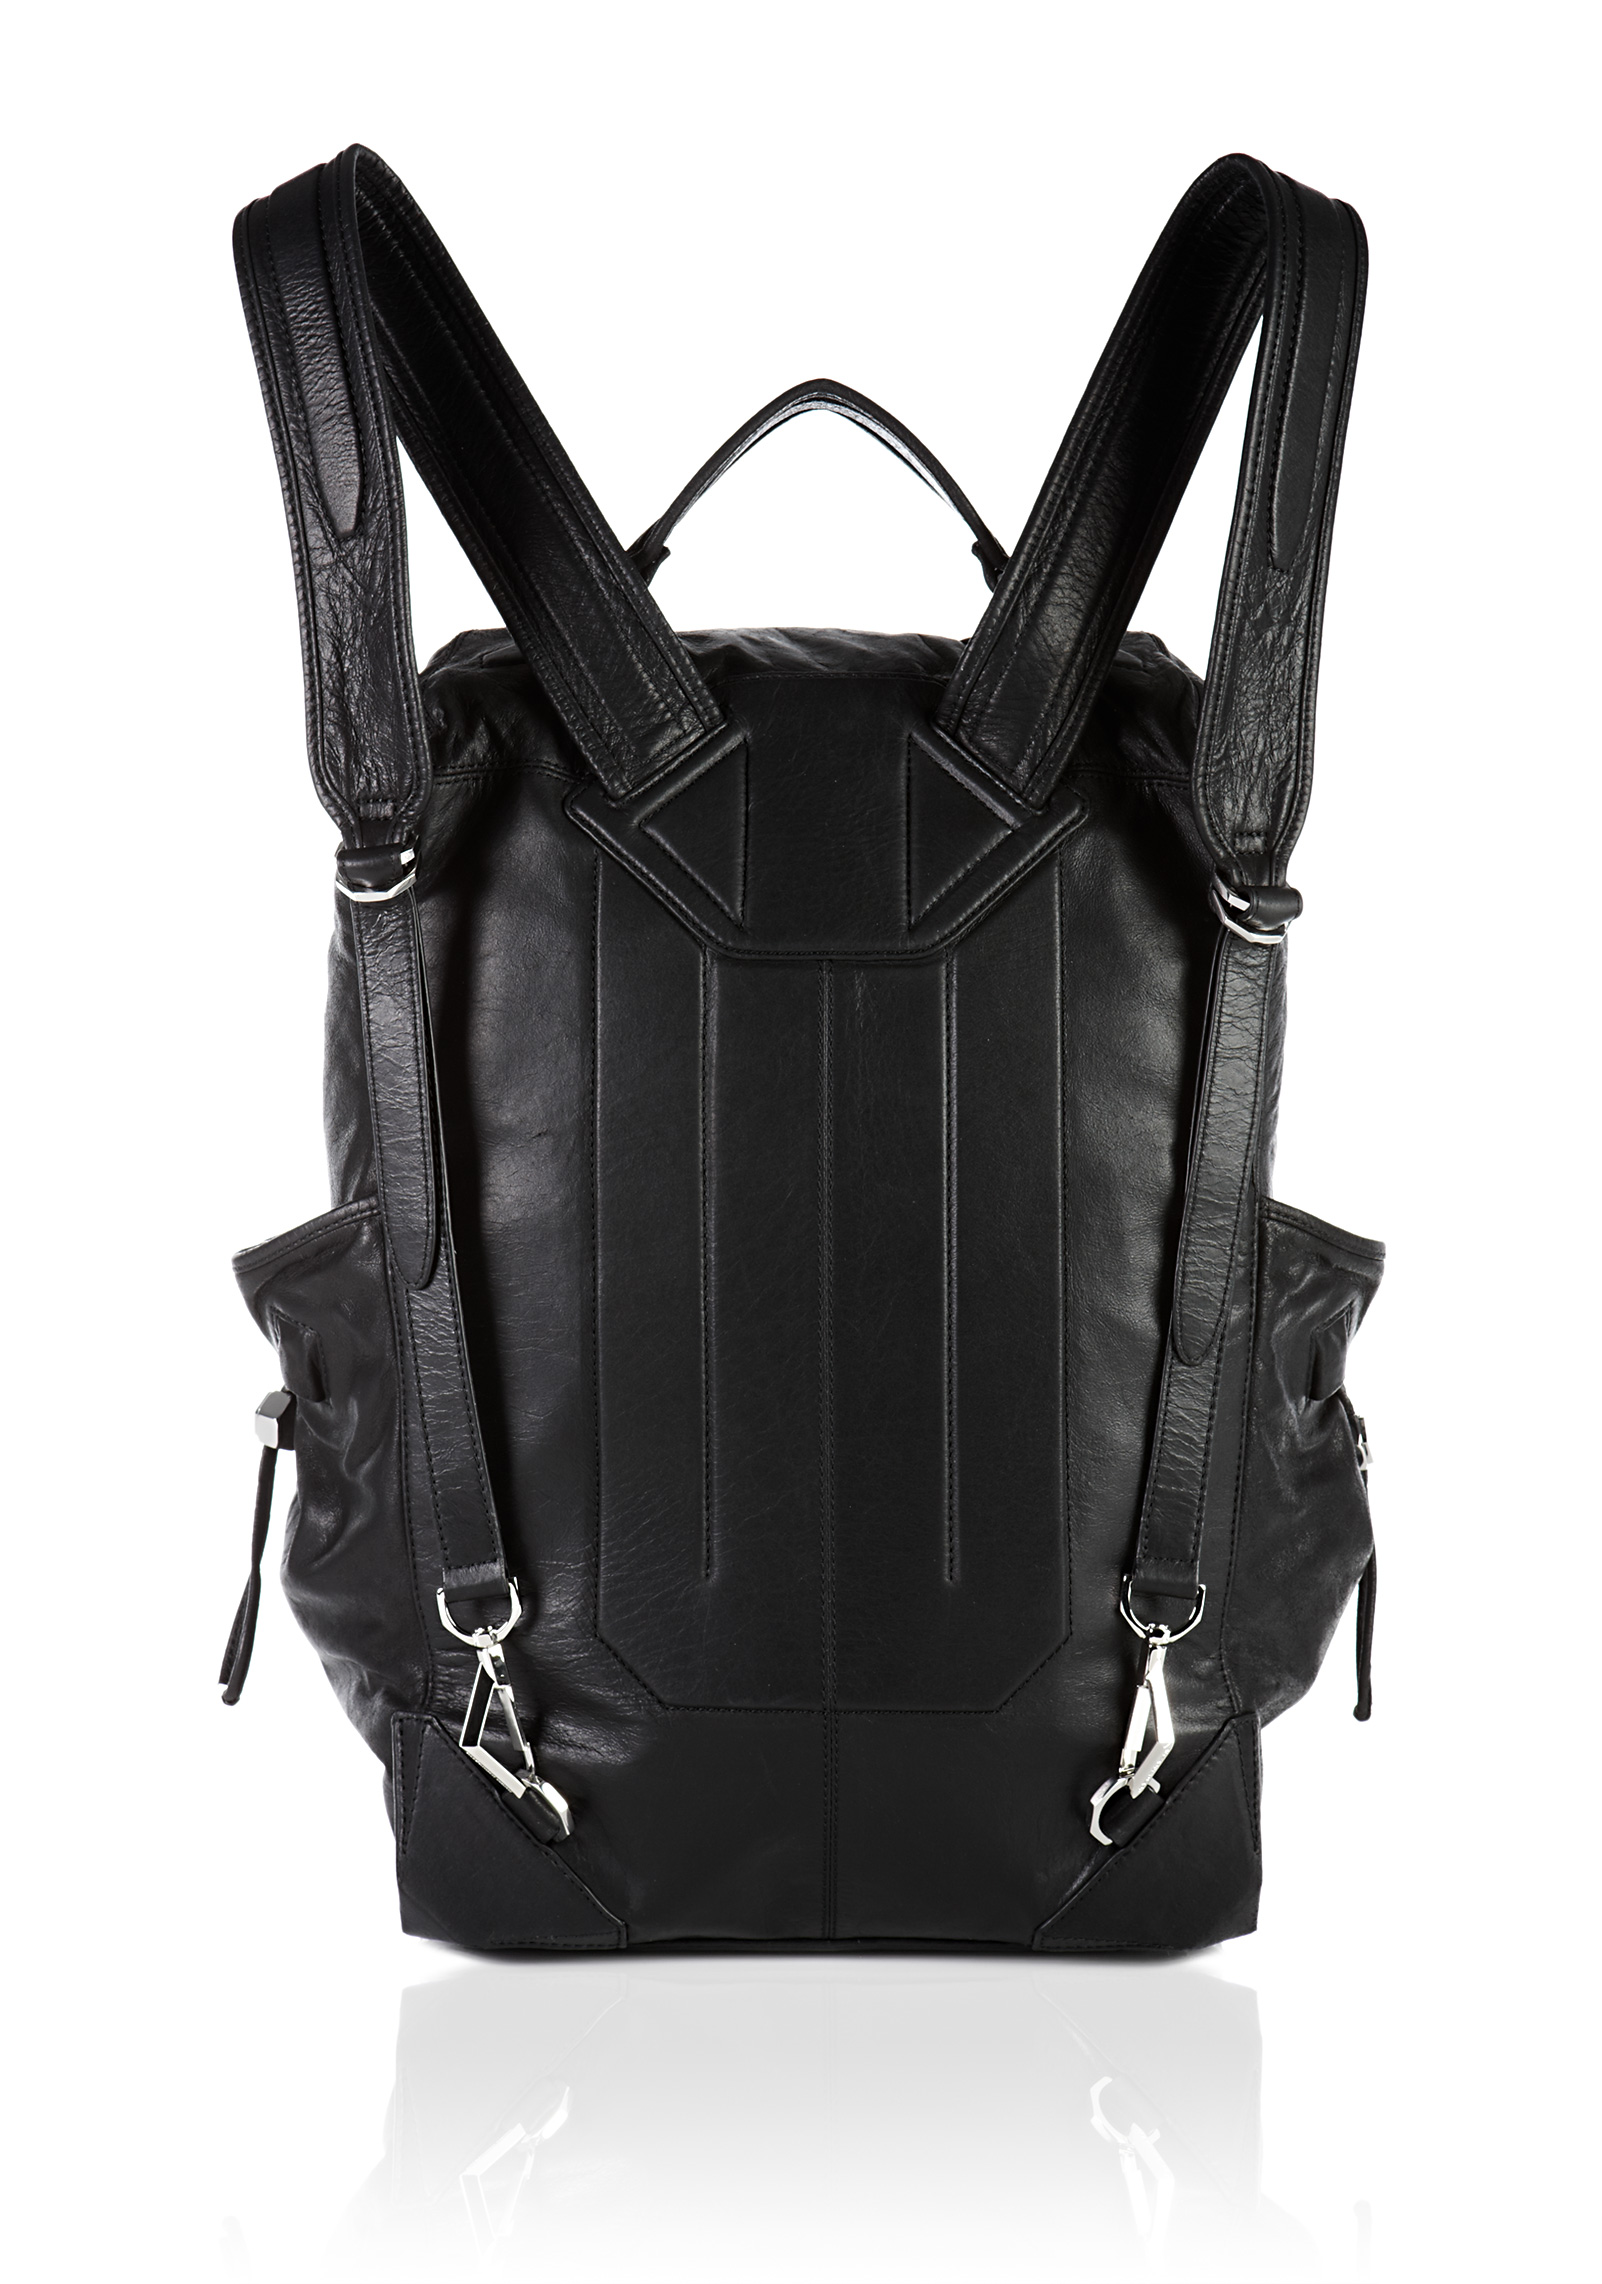 Lyst - Alexander wang Small Wallie Backpack In Waxy Black With Rhodium ...